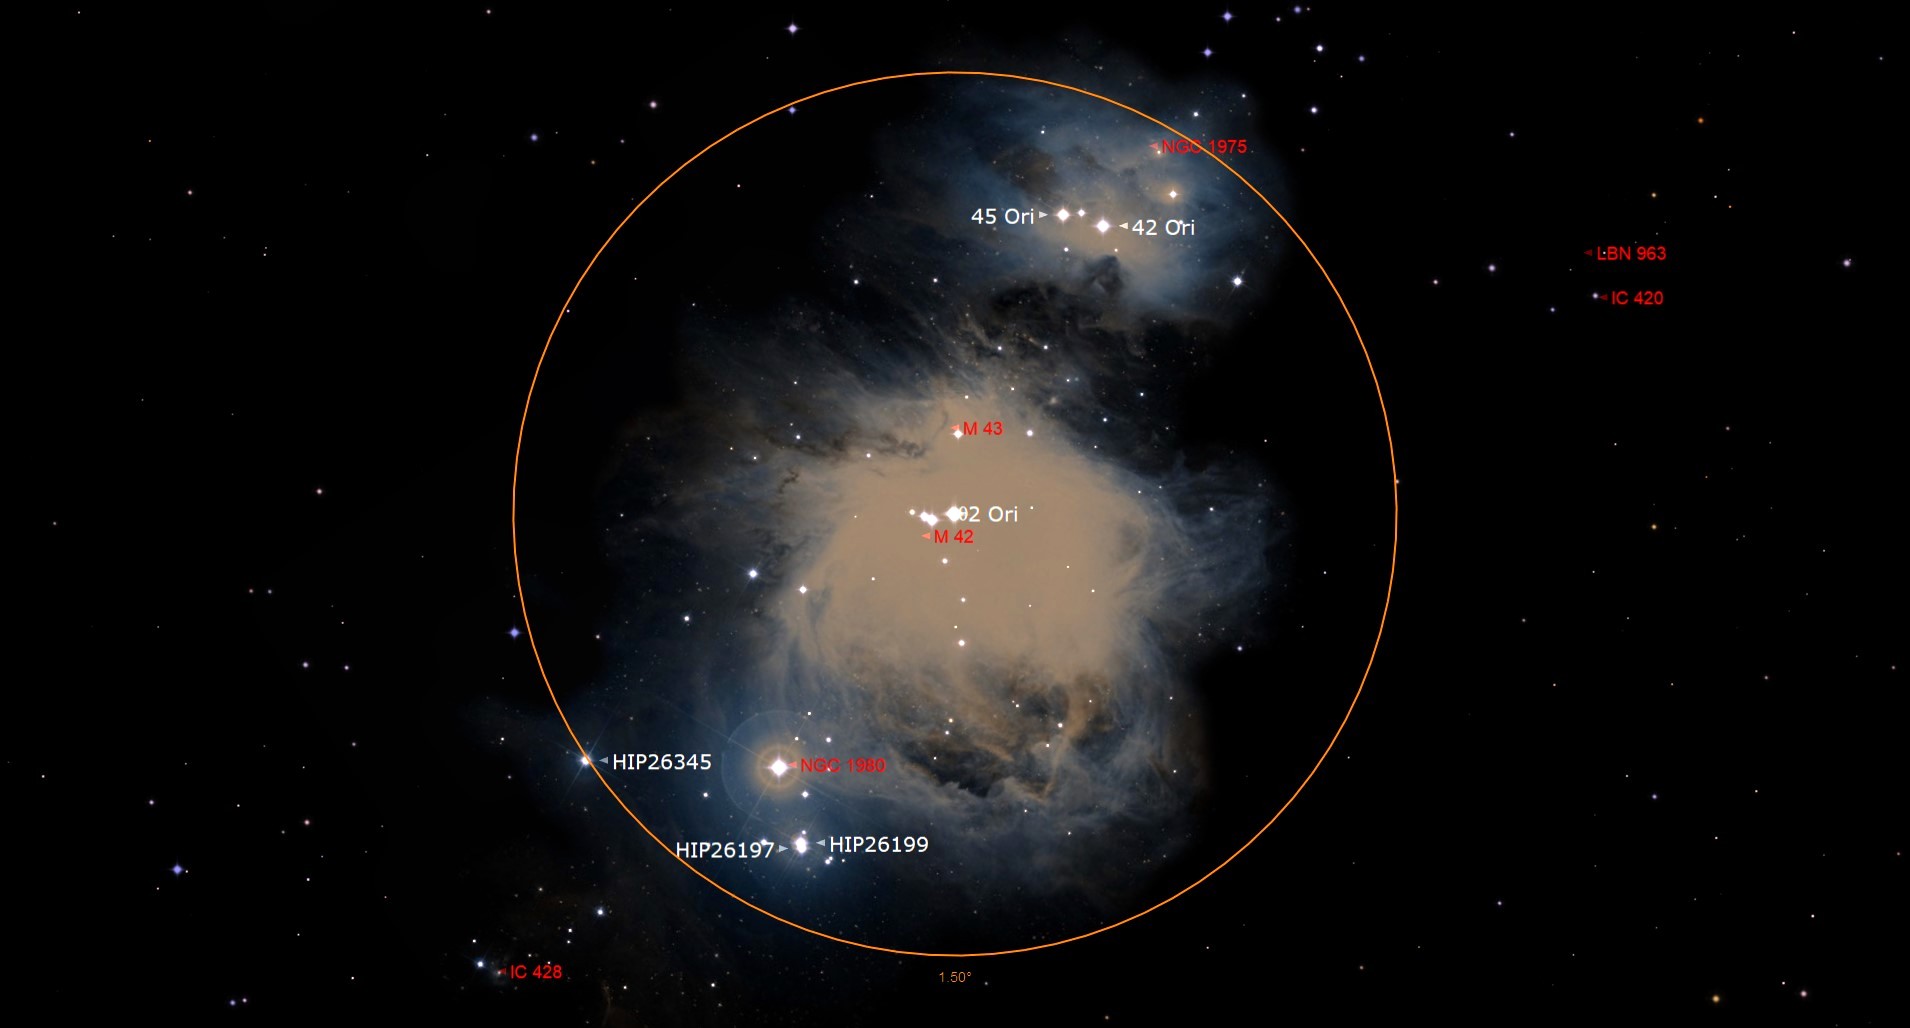 An illustration of the Orion Nebula and surrounding stars.